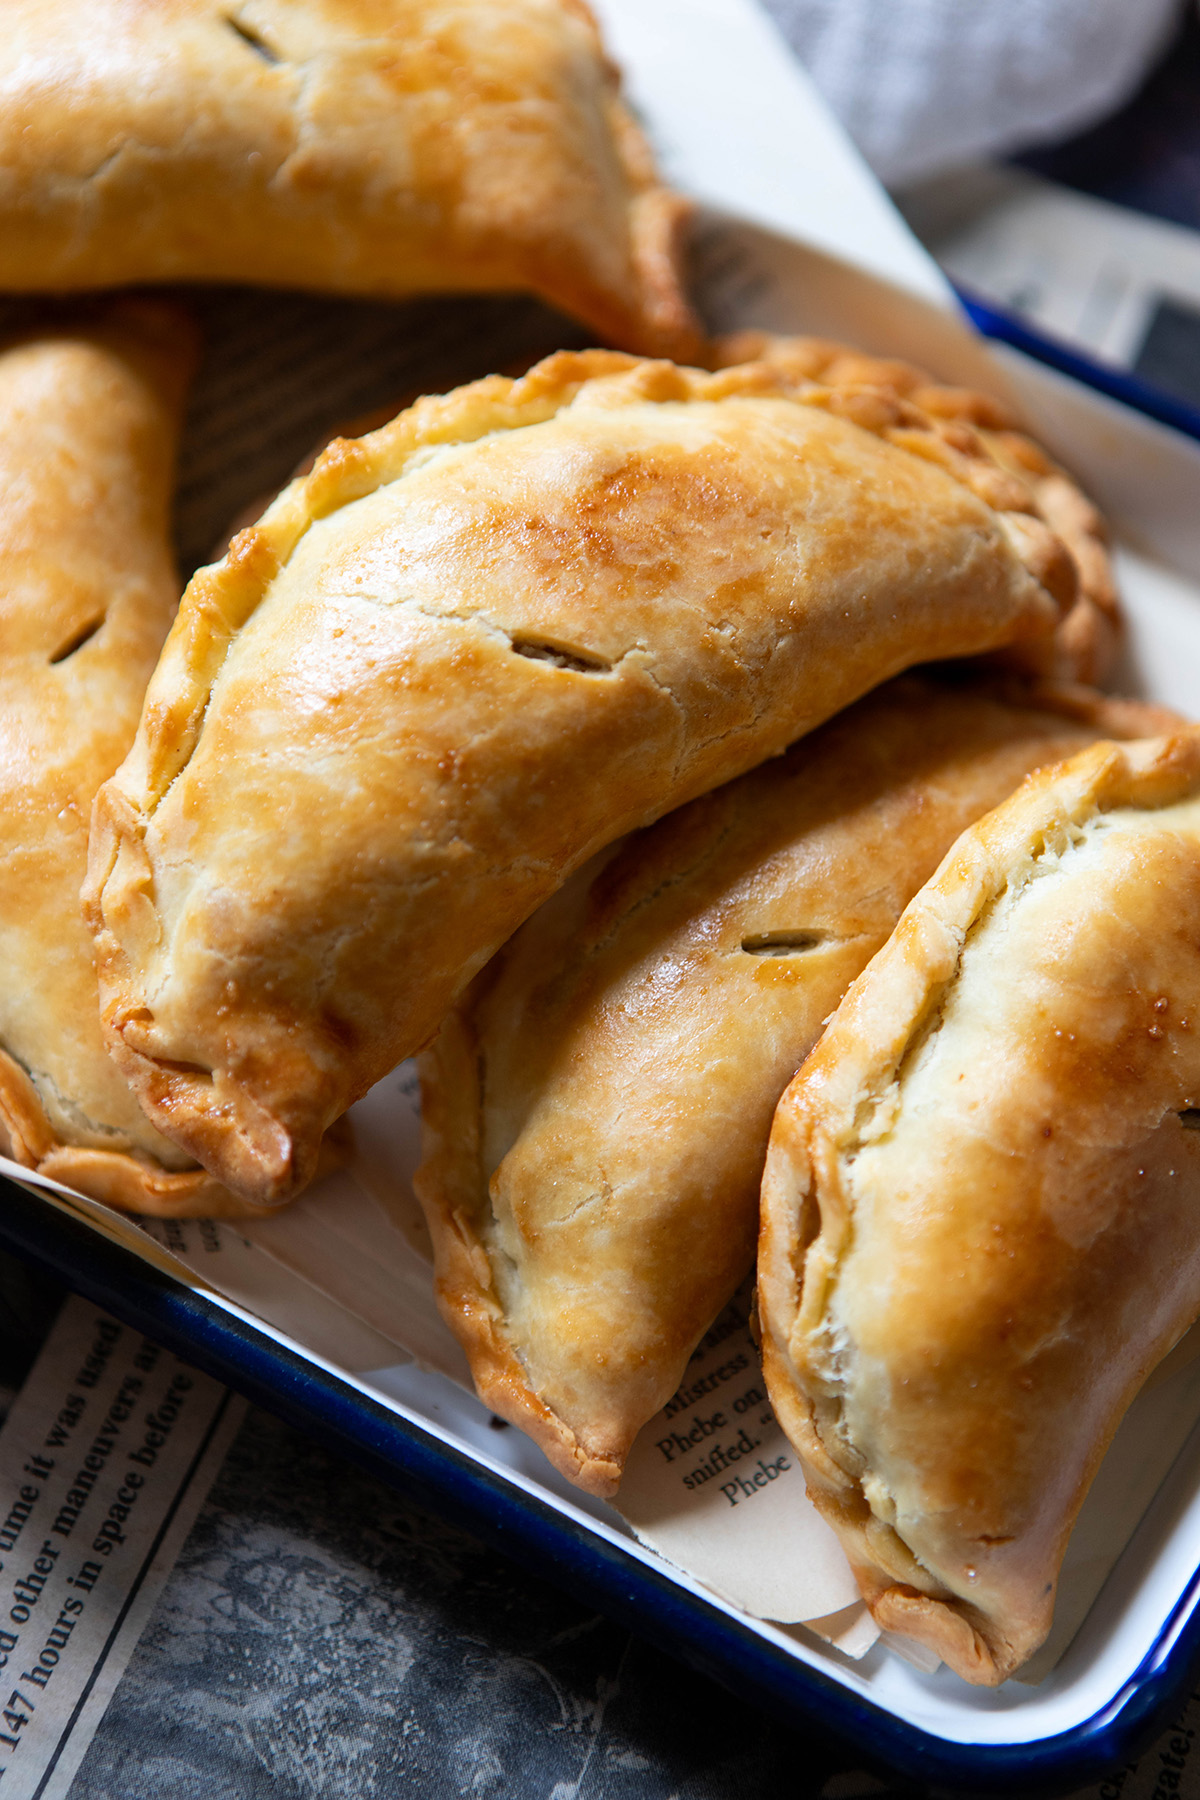 How To Cook Frozen Pasties: Cooking Pasty Instructions